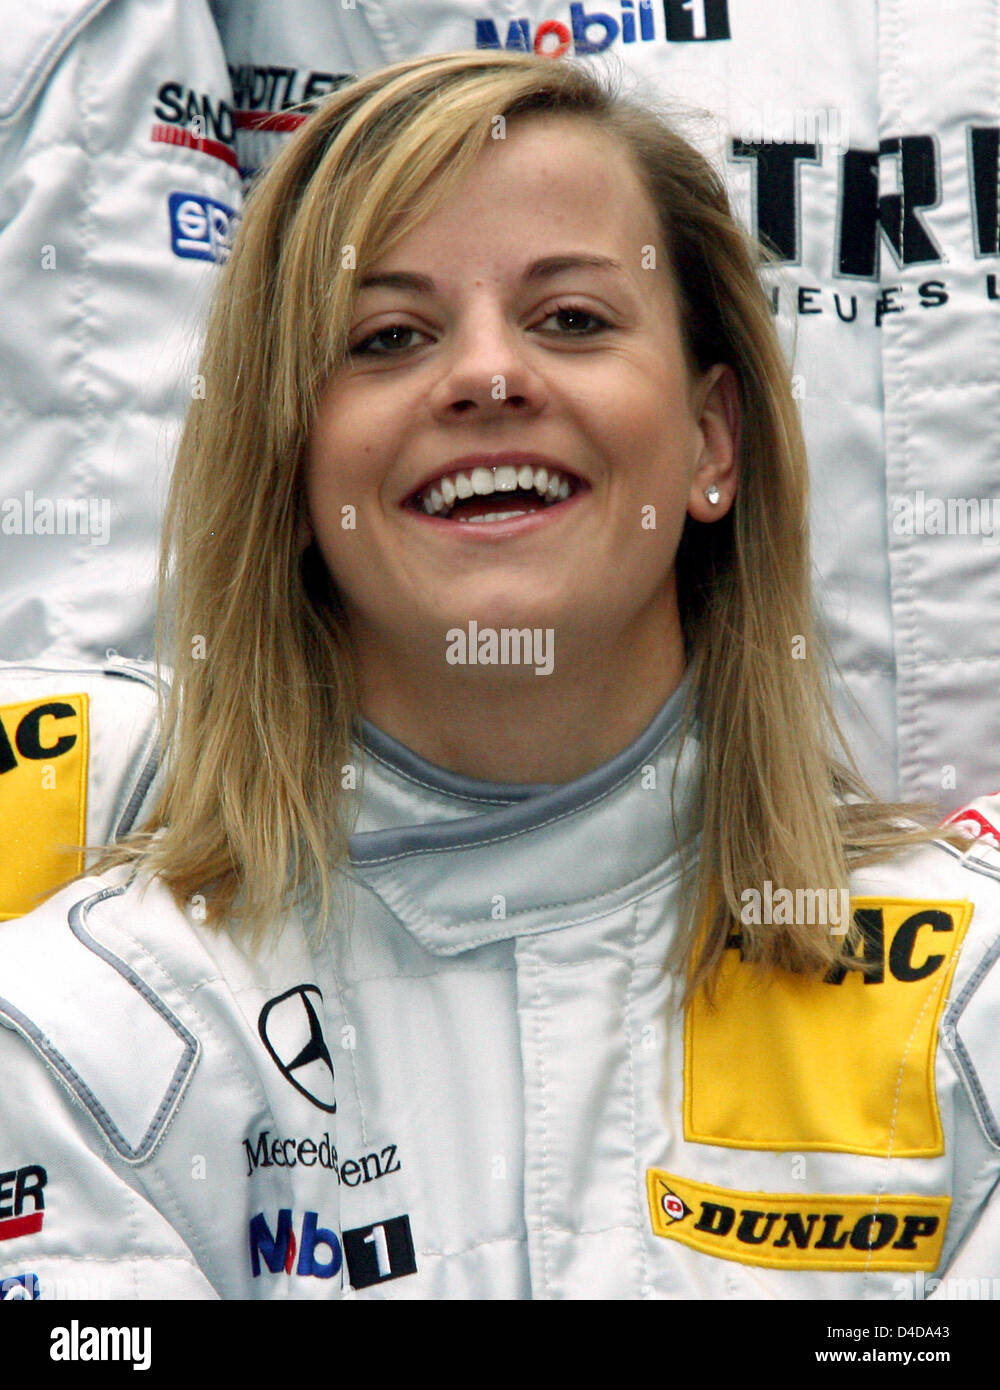 The British DTM driver Susie Stoddart (AMG Mercedes) is pictured at the drivers' presentation in Duesseldorf, Gerrmany, 06 April 2008. Photo: Roland Weihrauch Stock Photo